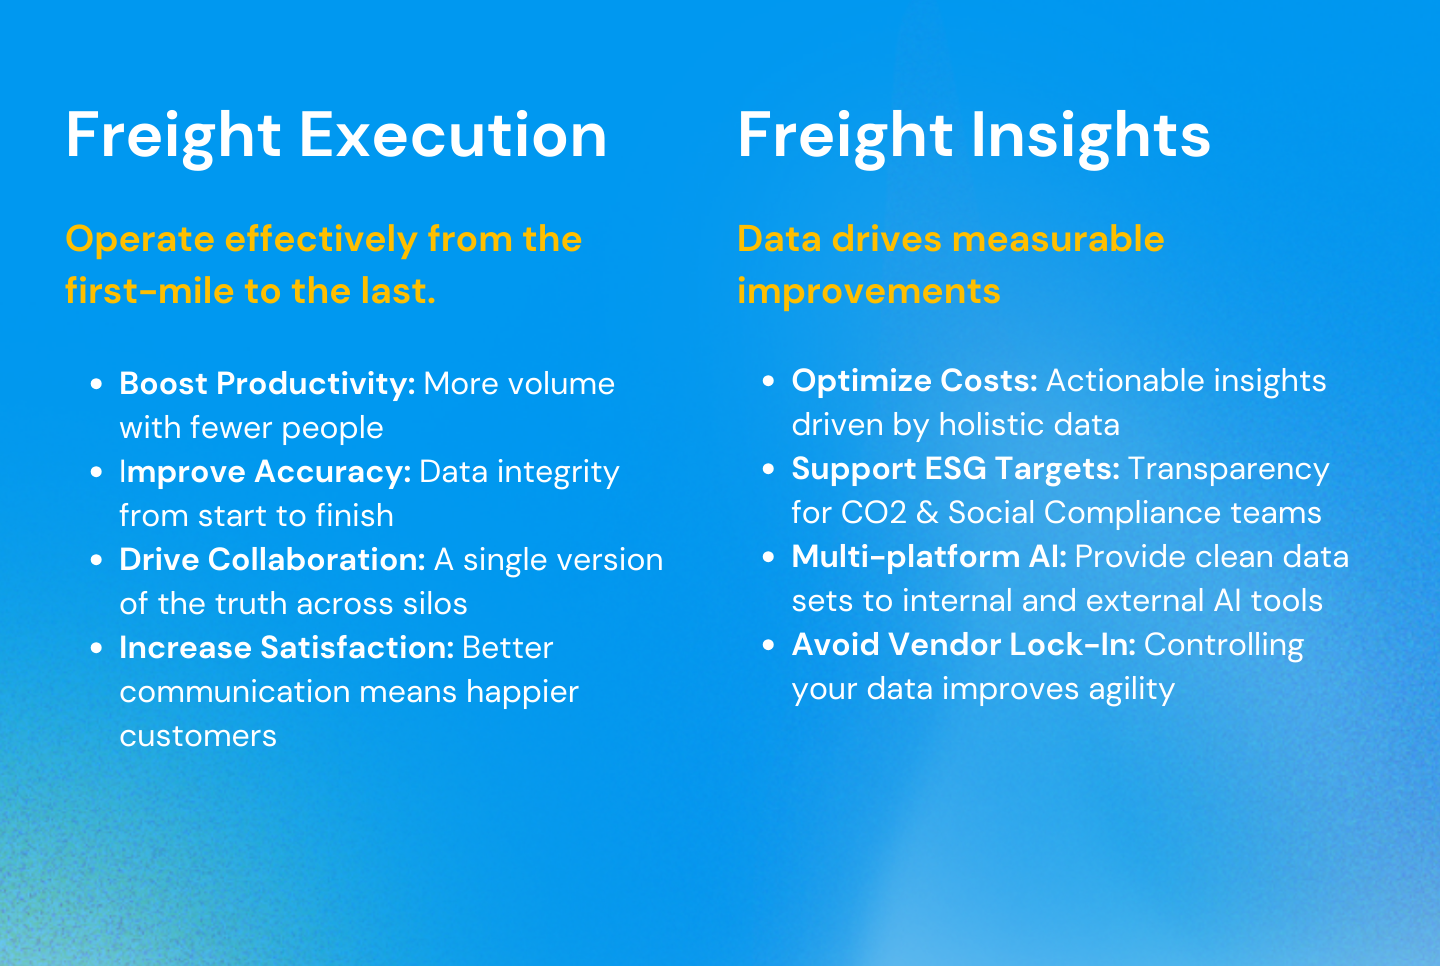 Freight executions + freight insights